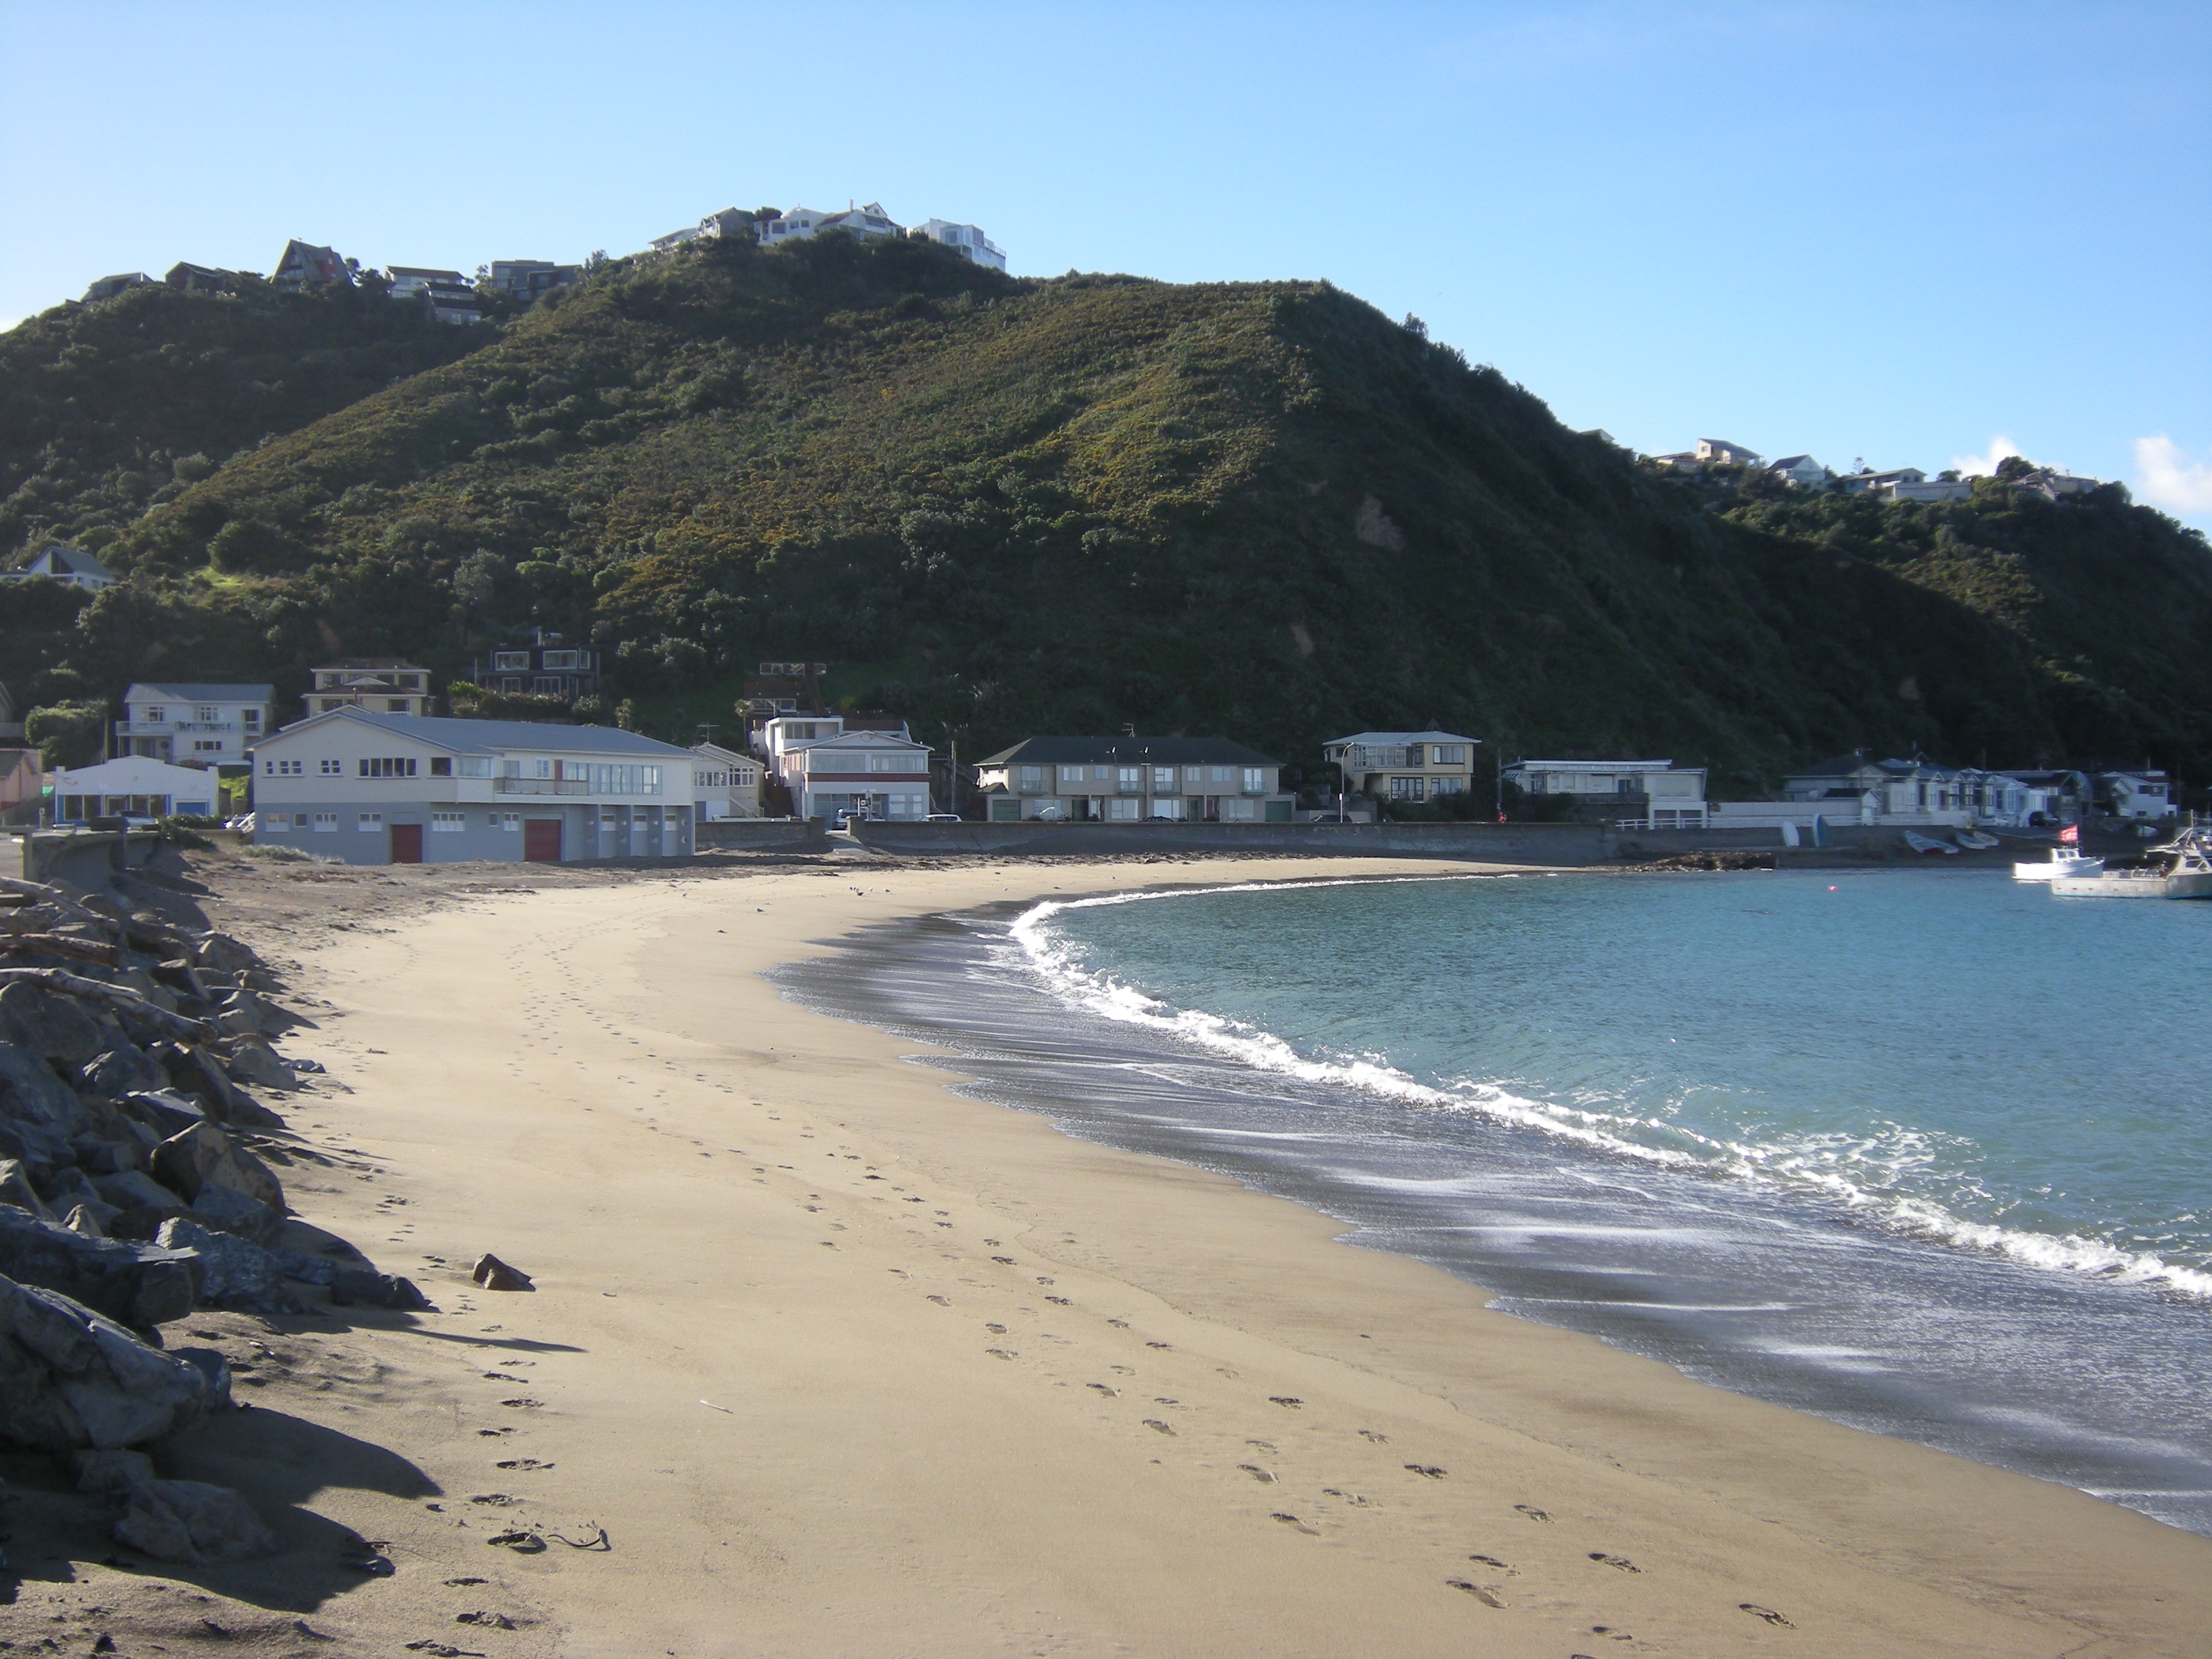 Island Bay beach with damaged sea wall in foreground. Image: WCC, 2014